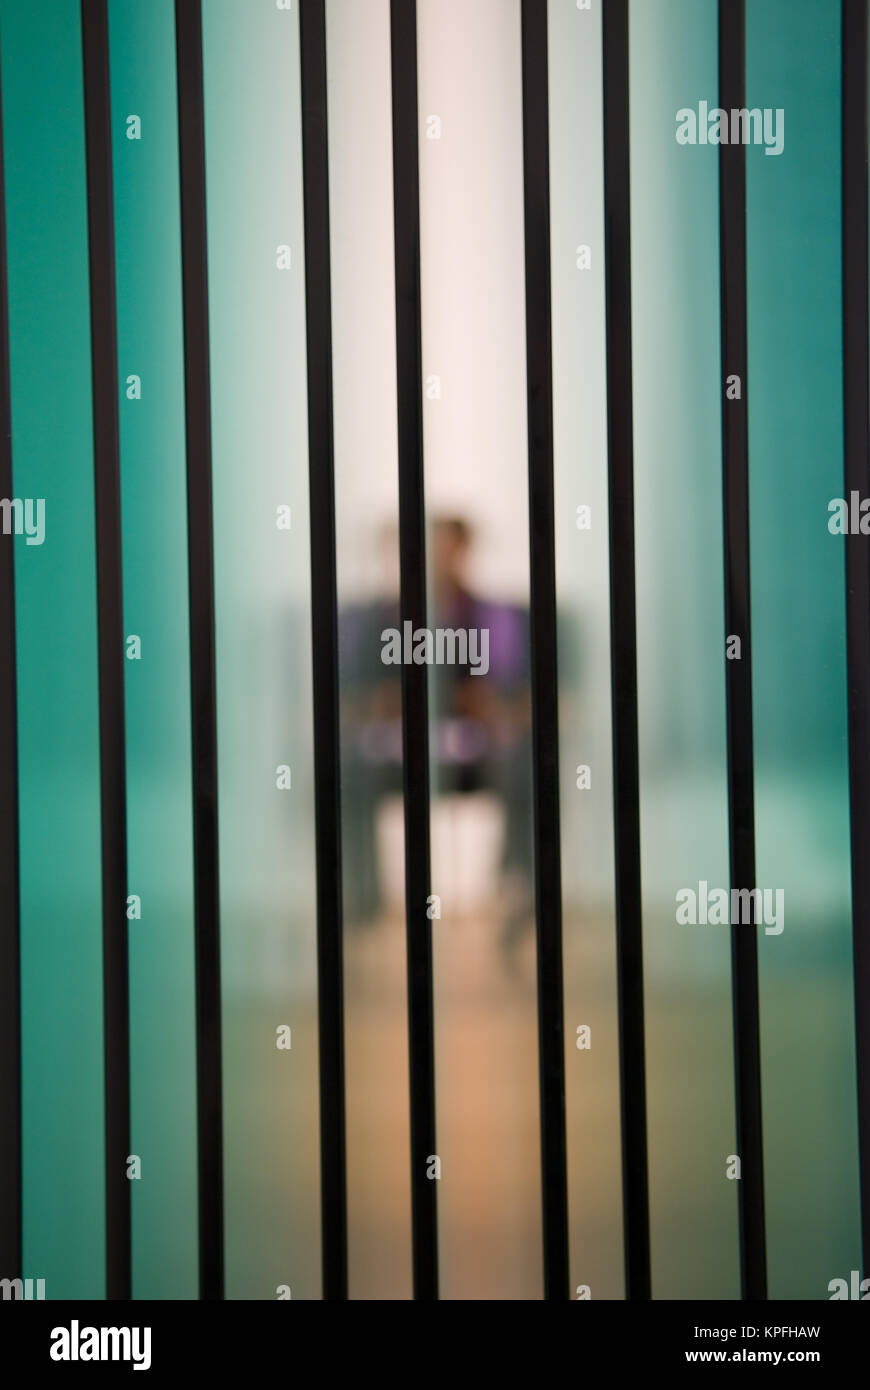 looking through several sheets of glass towards a blurred sitting person Stock Photo